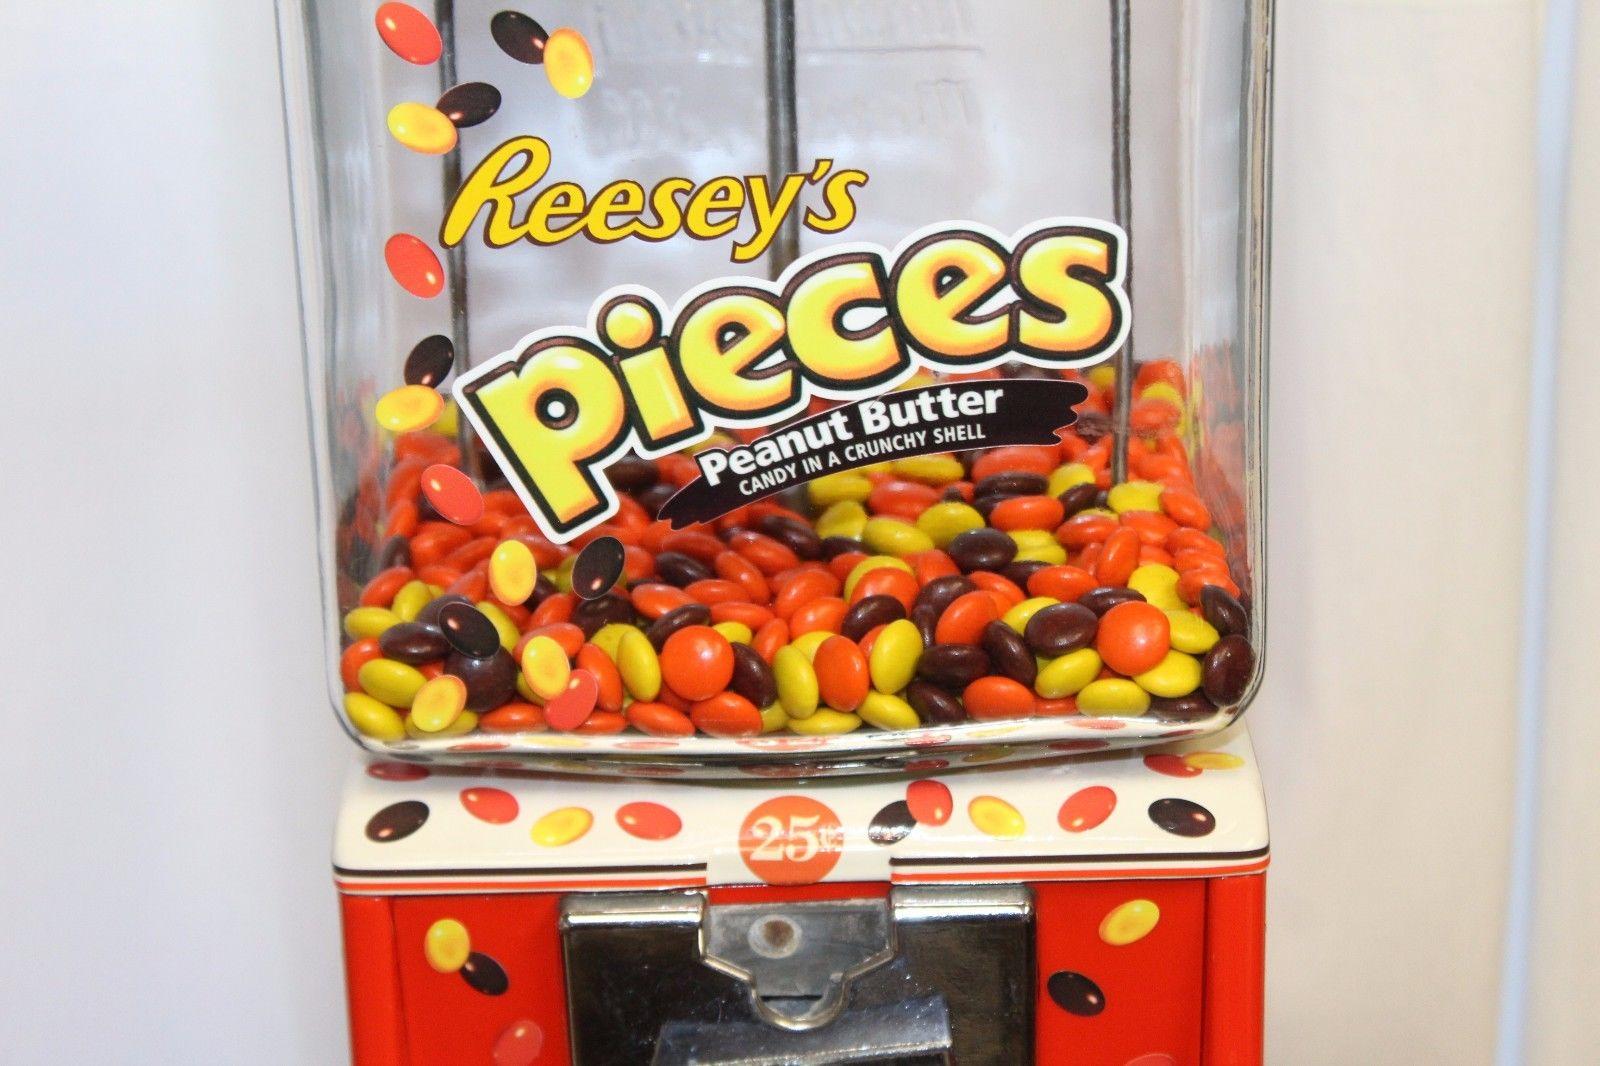 Amazing restored vintage candy machine with a restored new theme.